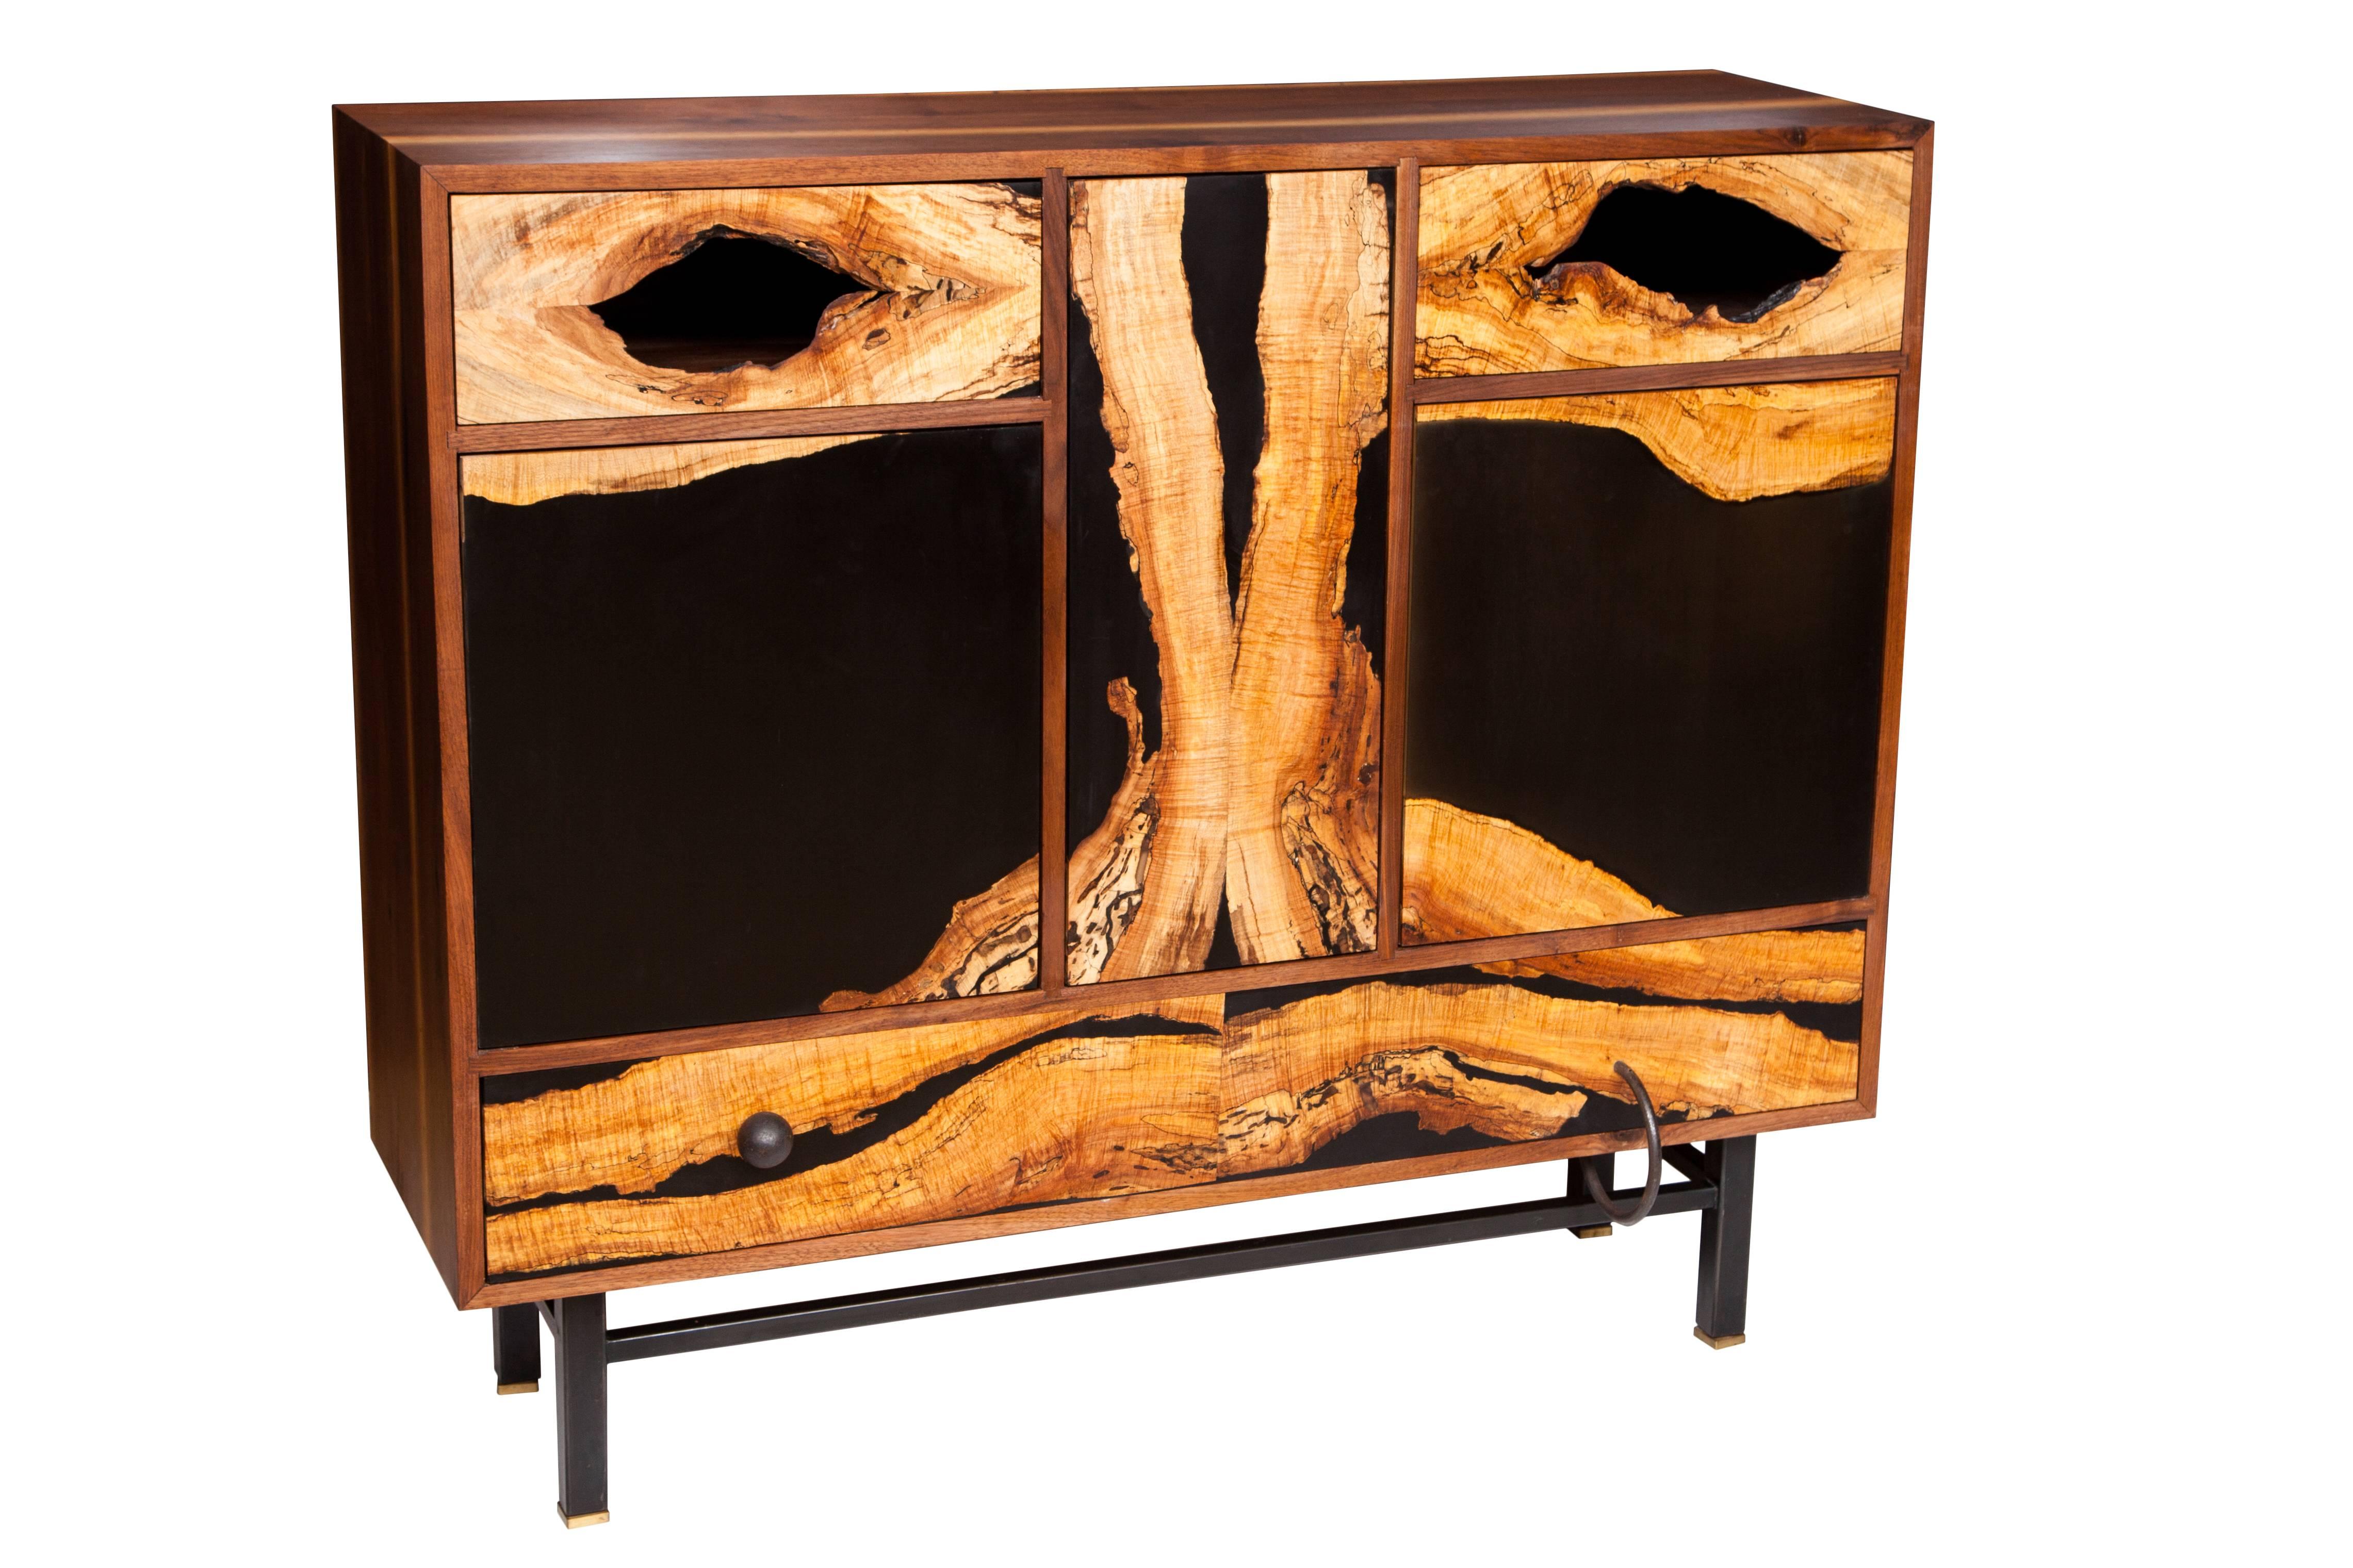 Face cabinet by Don Howell, circa 2010 in solid walnut with mitered and sliding dovetail joinery. Doors and drawers are spalted burled maple inset in tinted resin. Oxidized steel base on solid brass levelers detailed with wrought iron pulls.